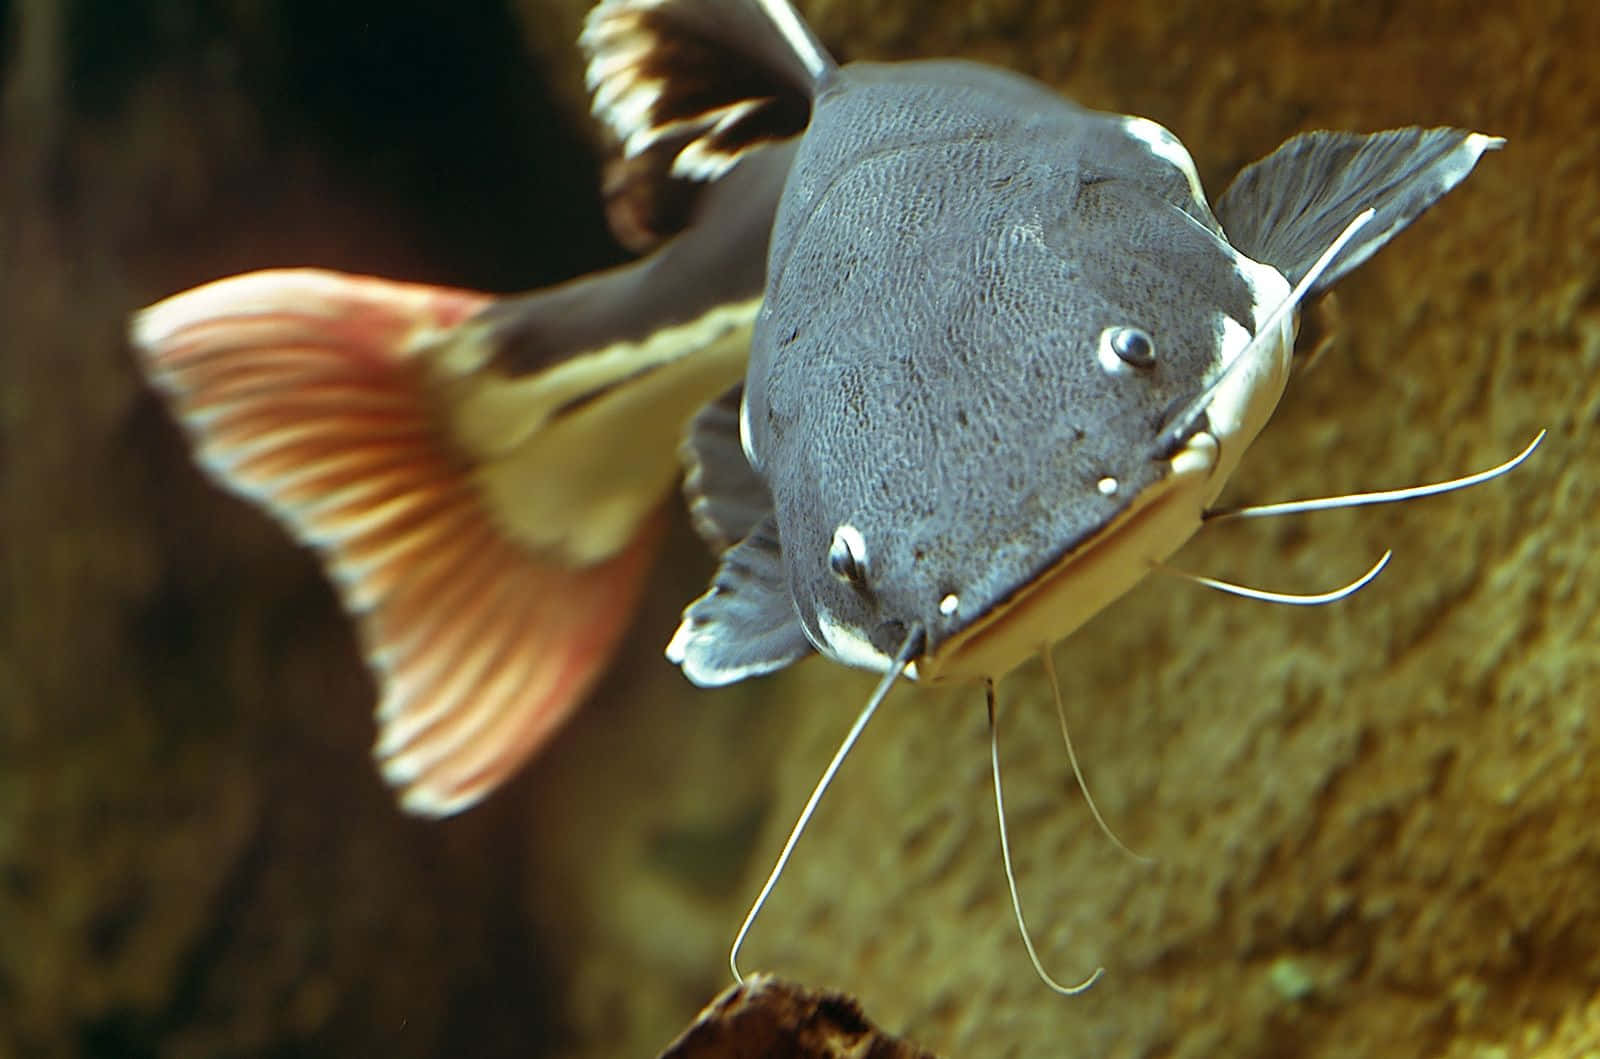 A Spotted Catfish in a Tank